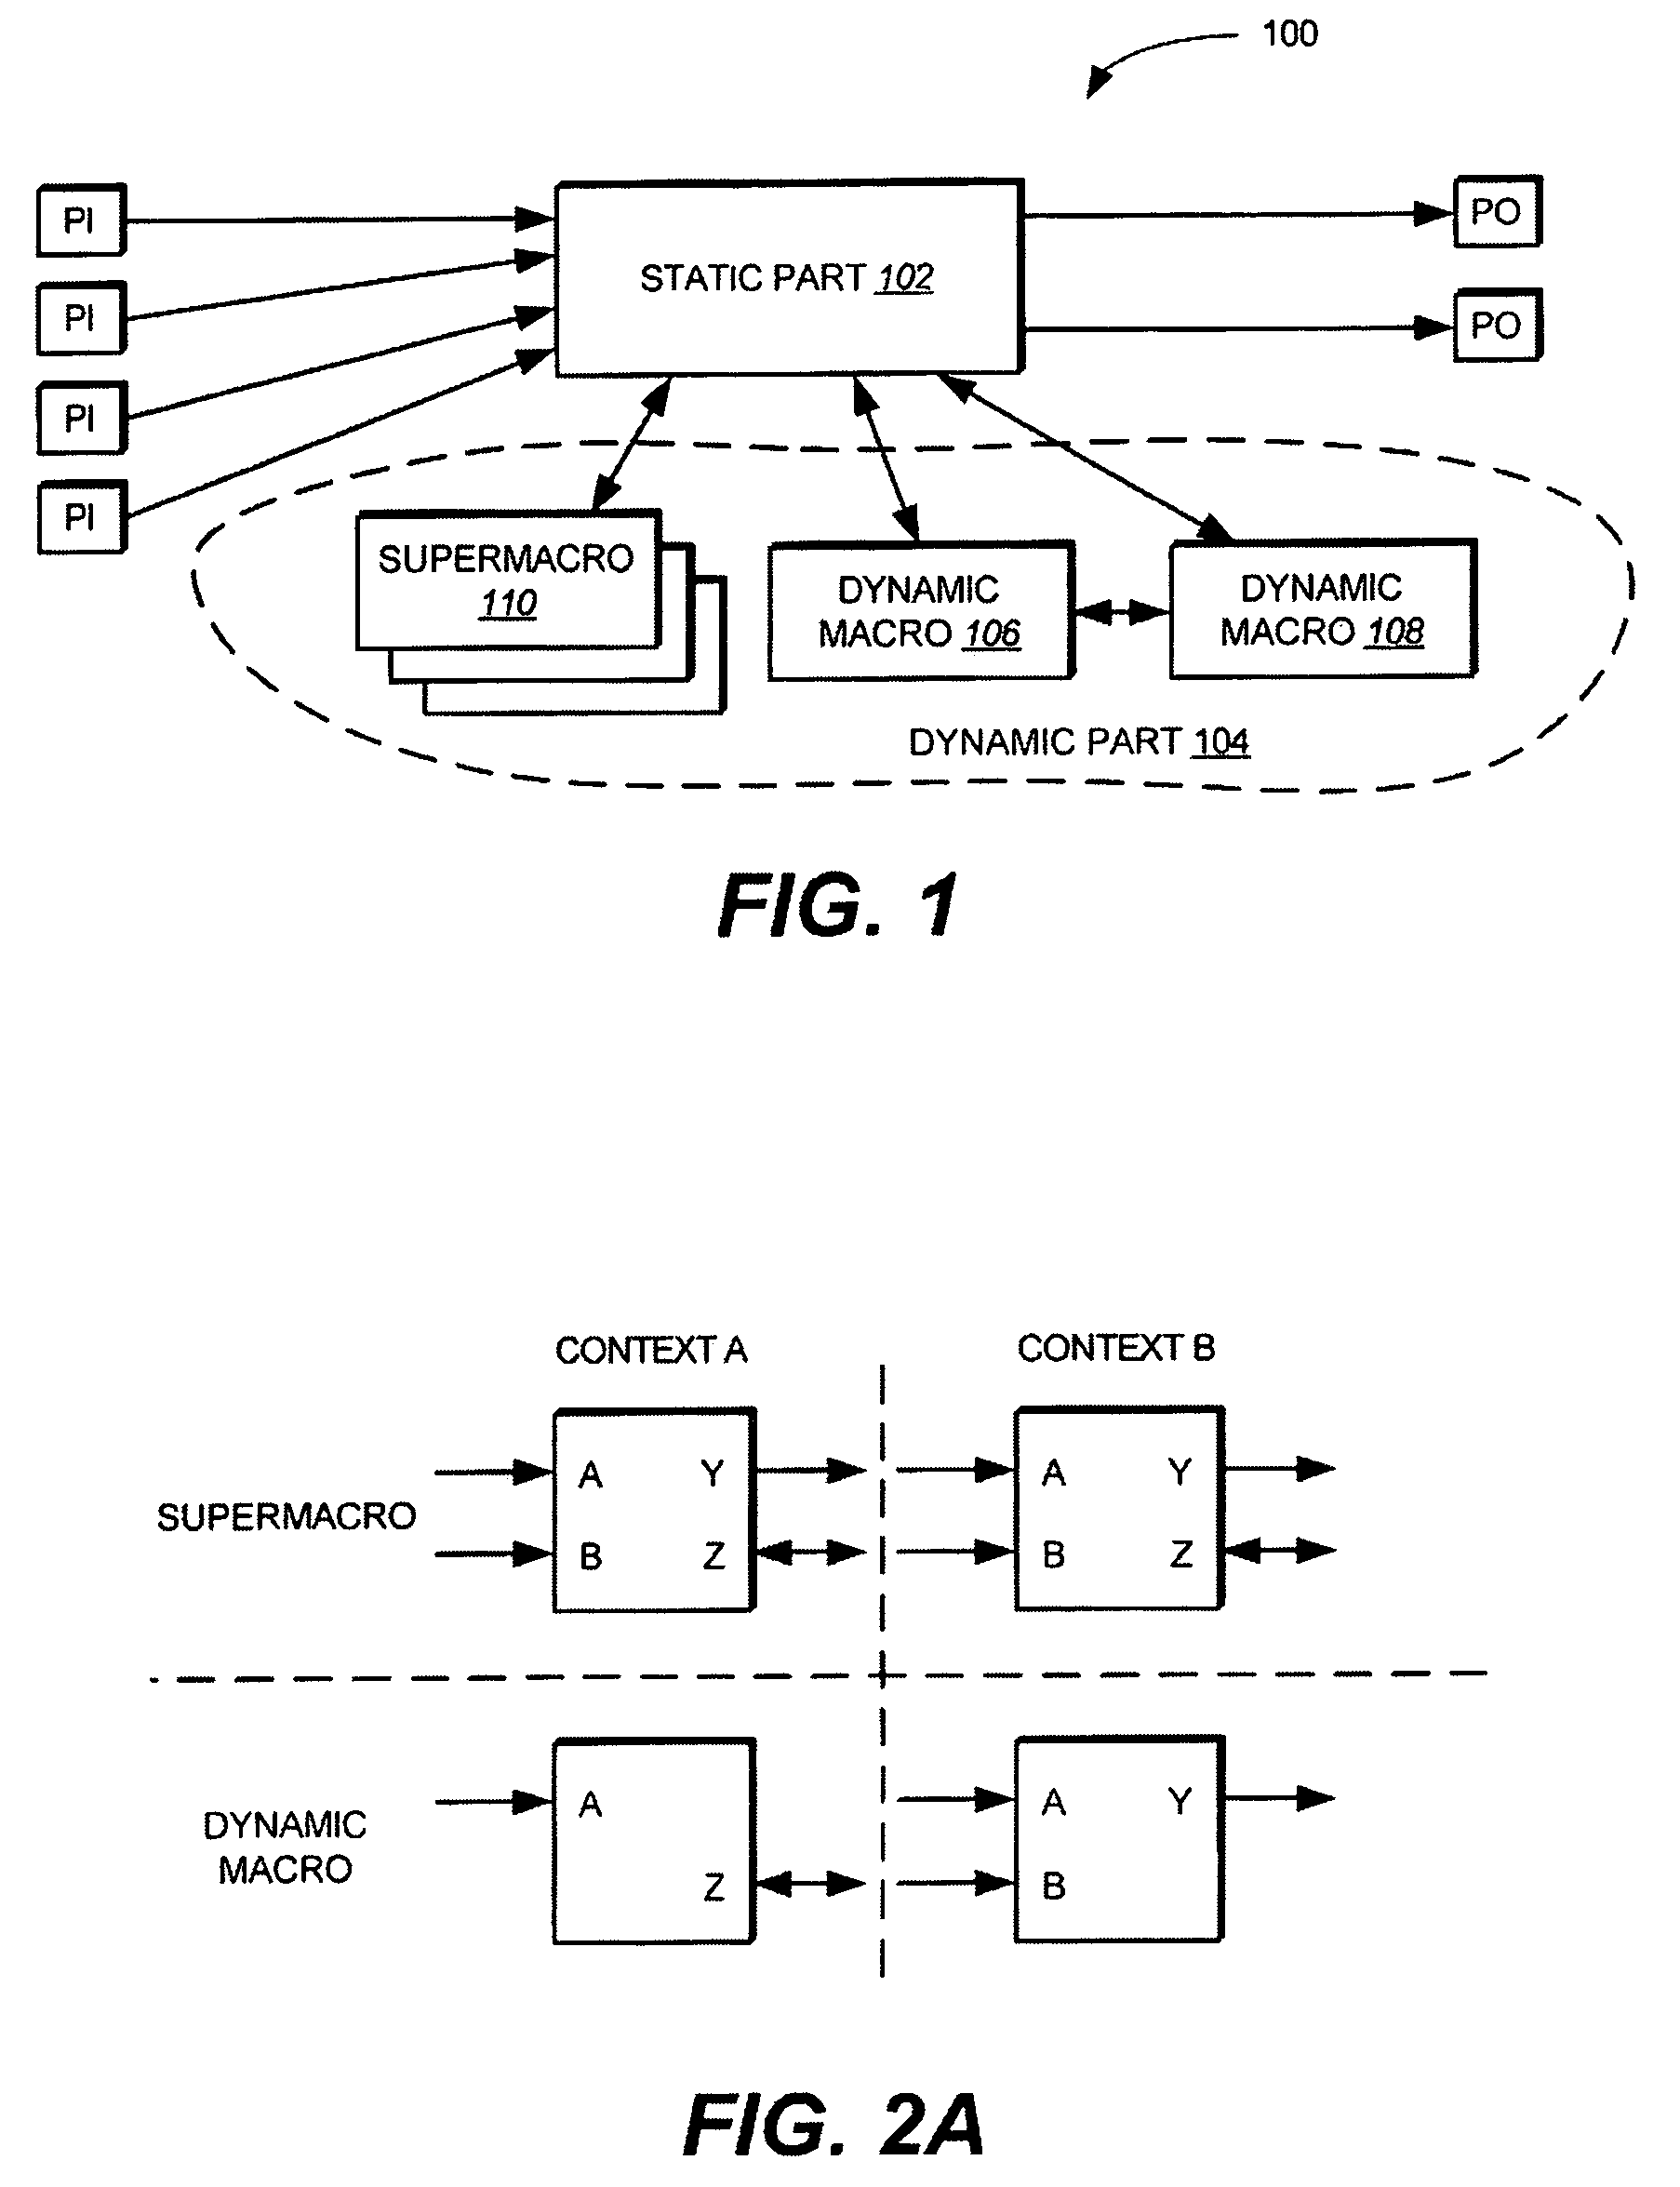 Method and system for dynamic reconfiguration of field programmable gate arrays